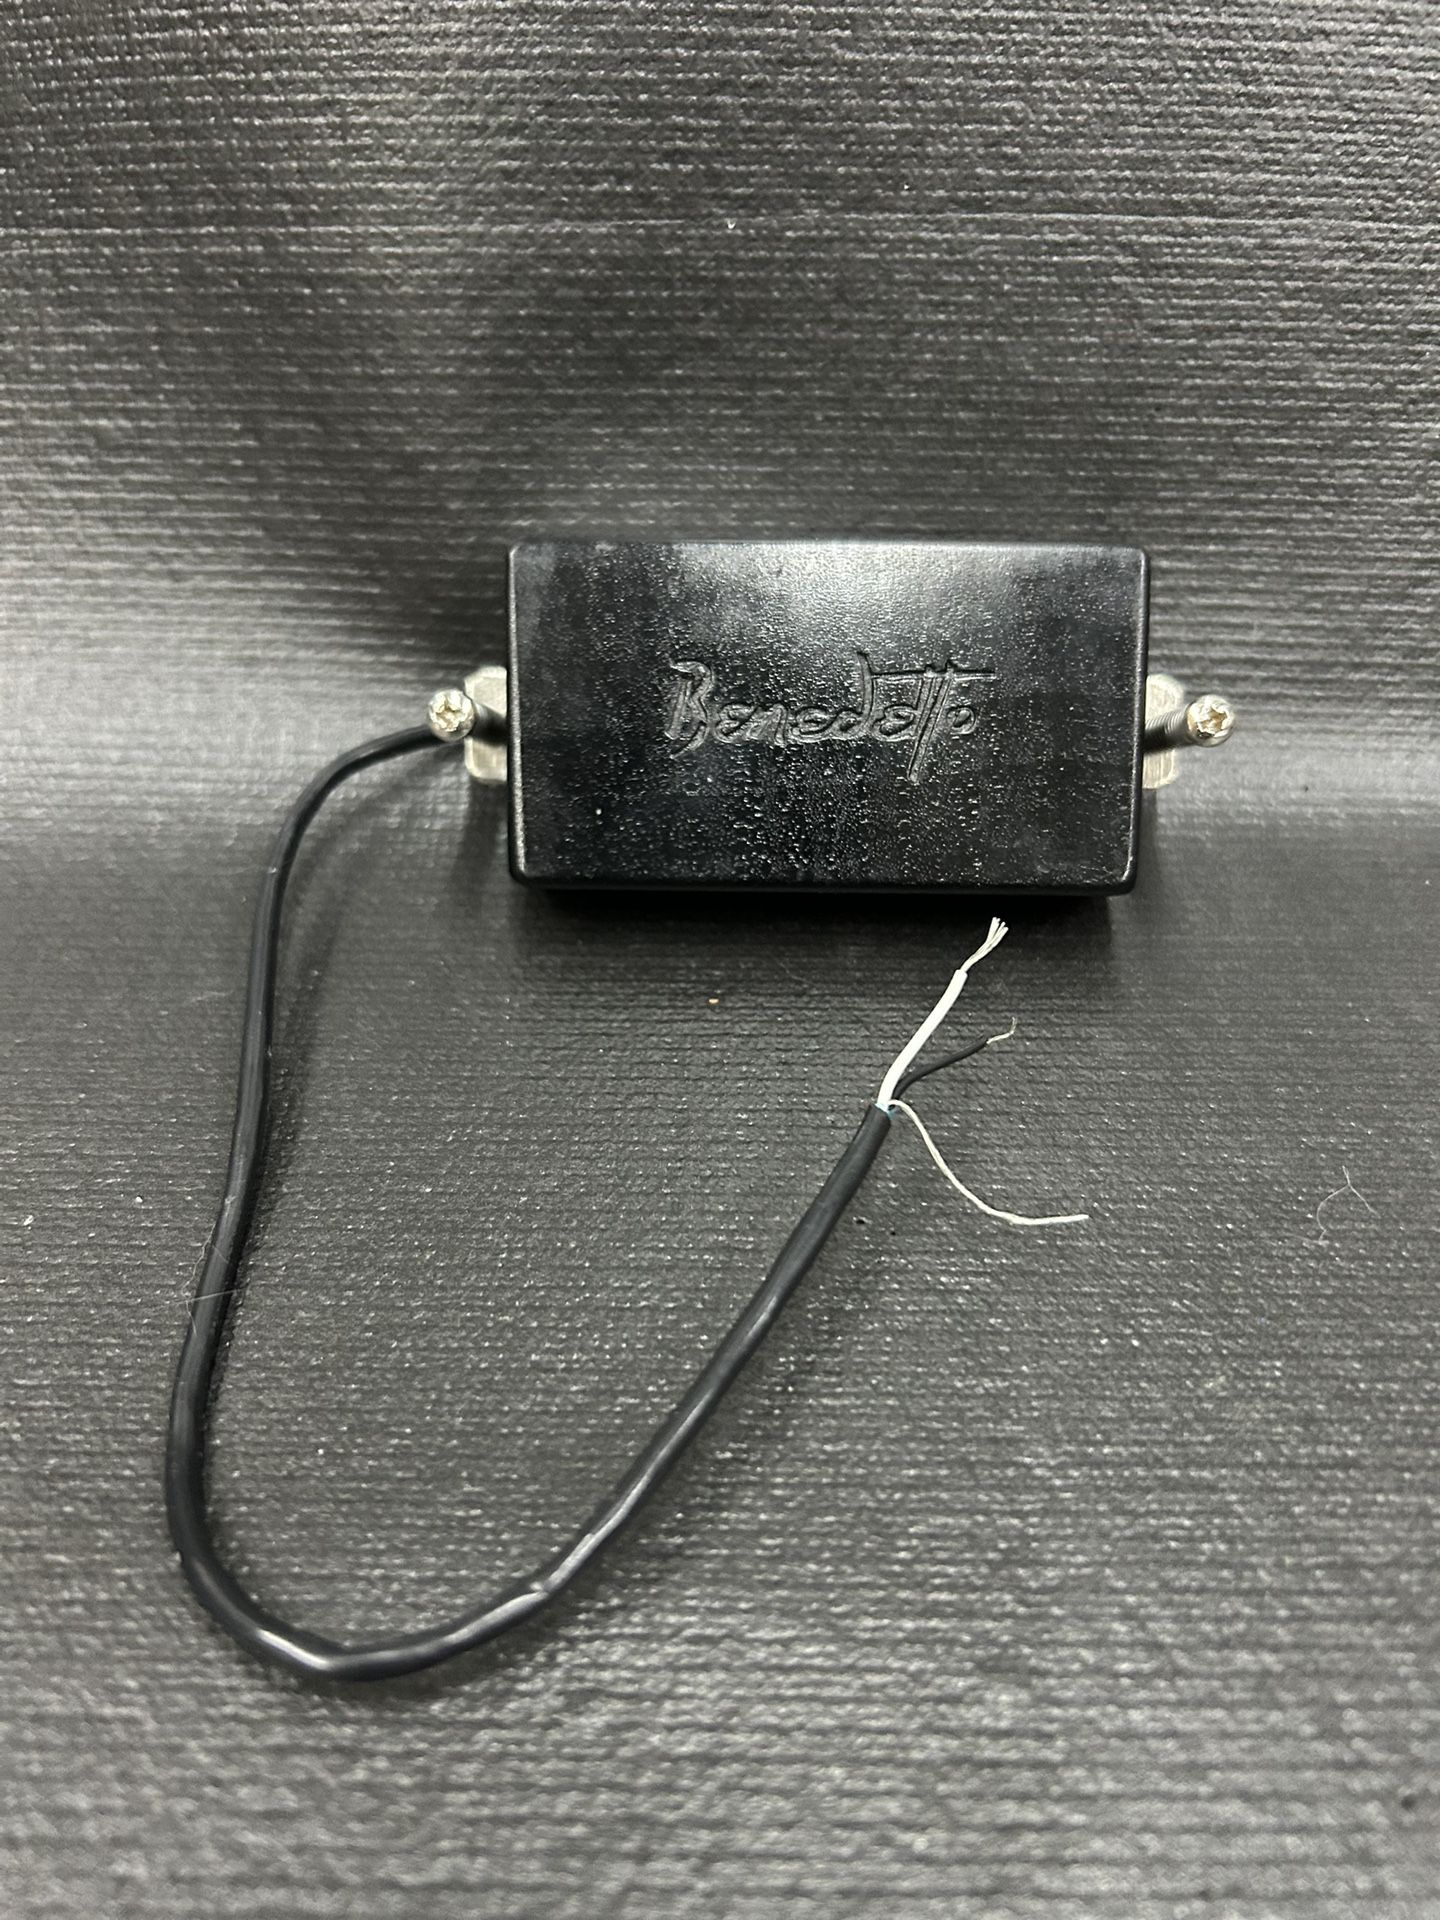 Seymour Duncan Benedetto B-6 Neck Pickup